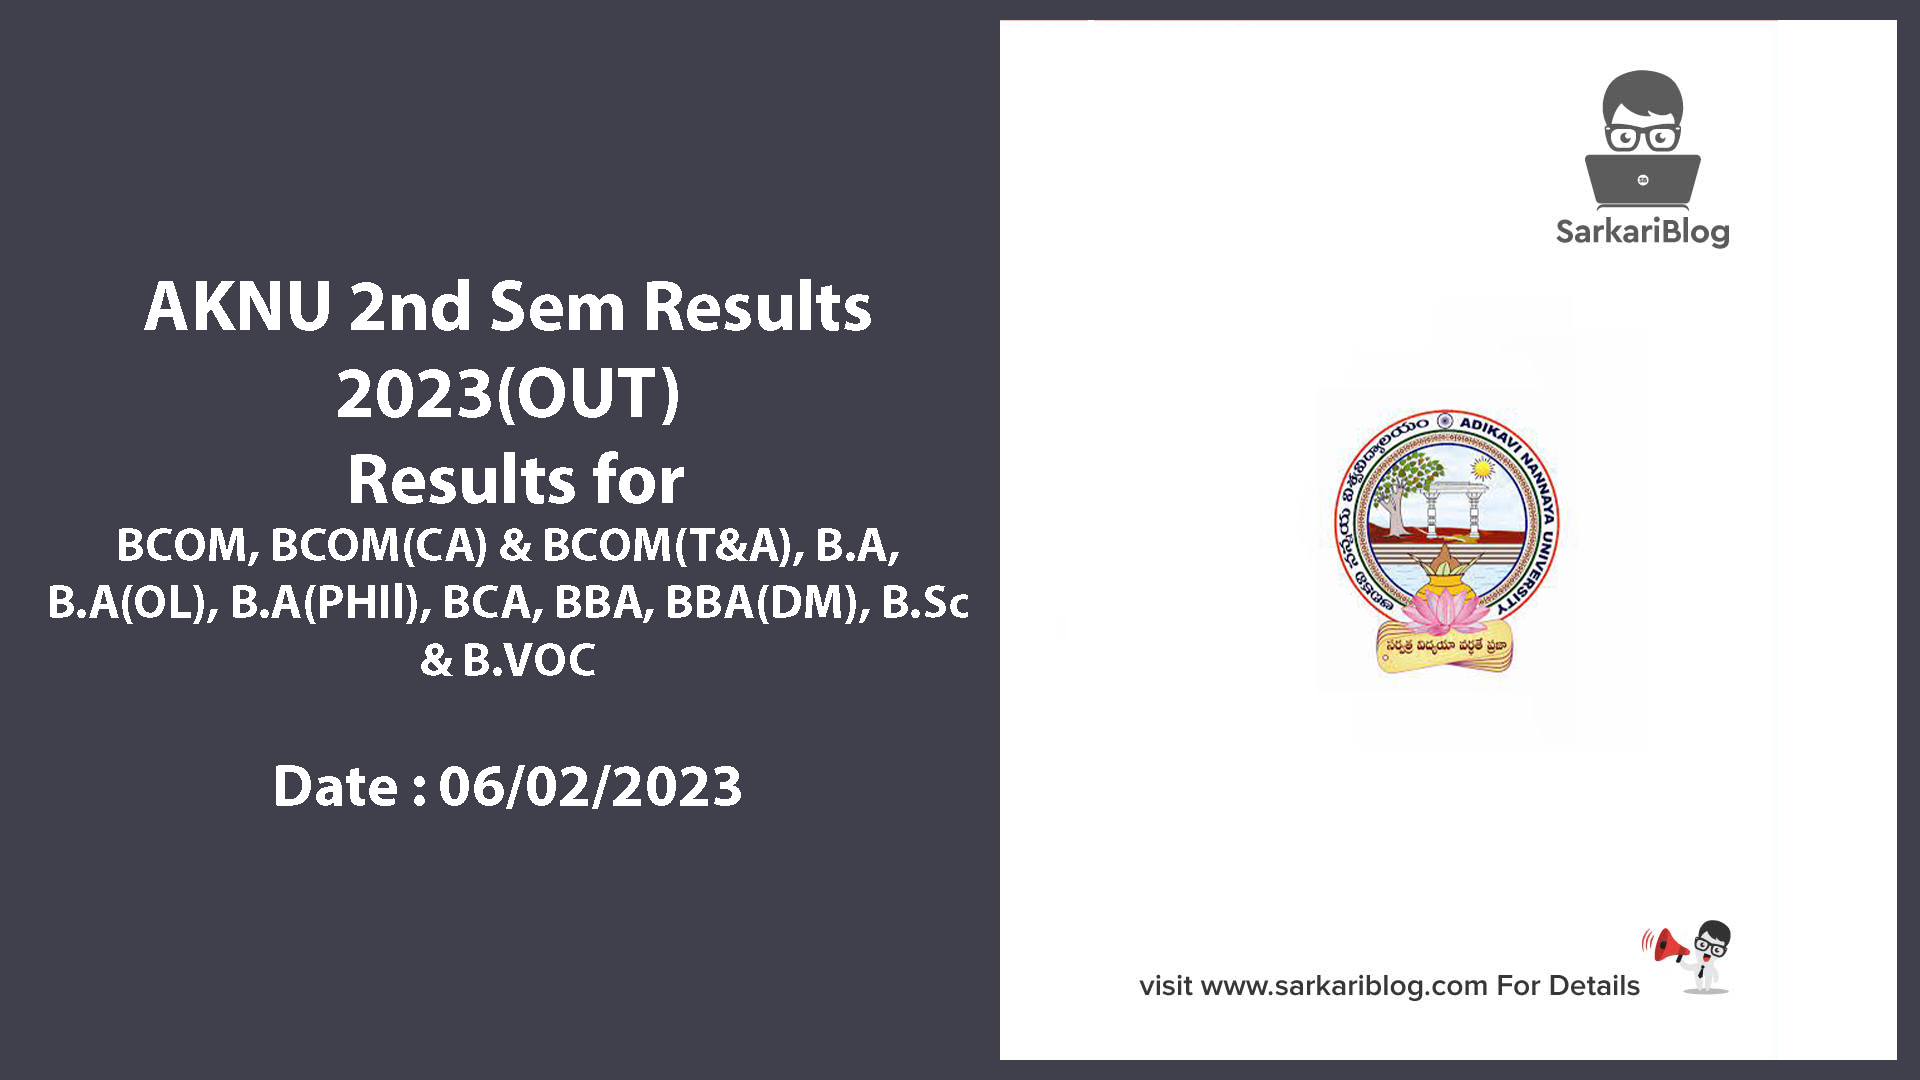 AKNU 2nd Sem Results 2023(OUT)